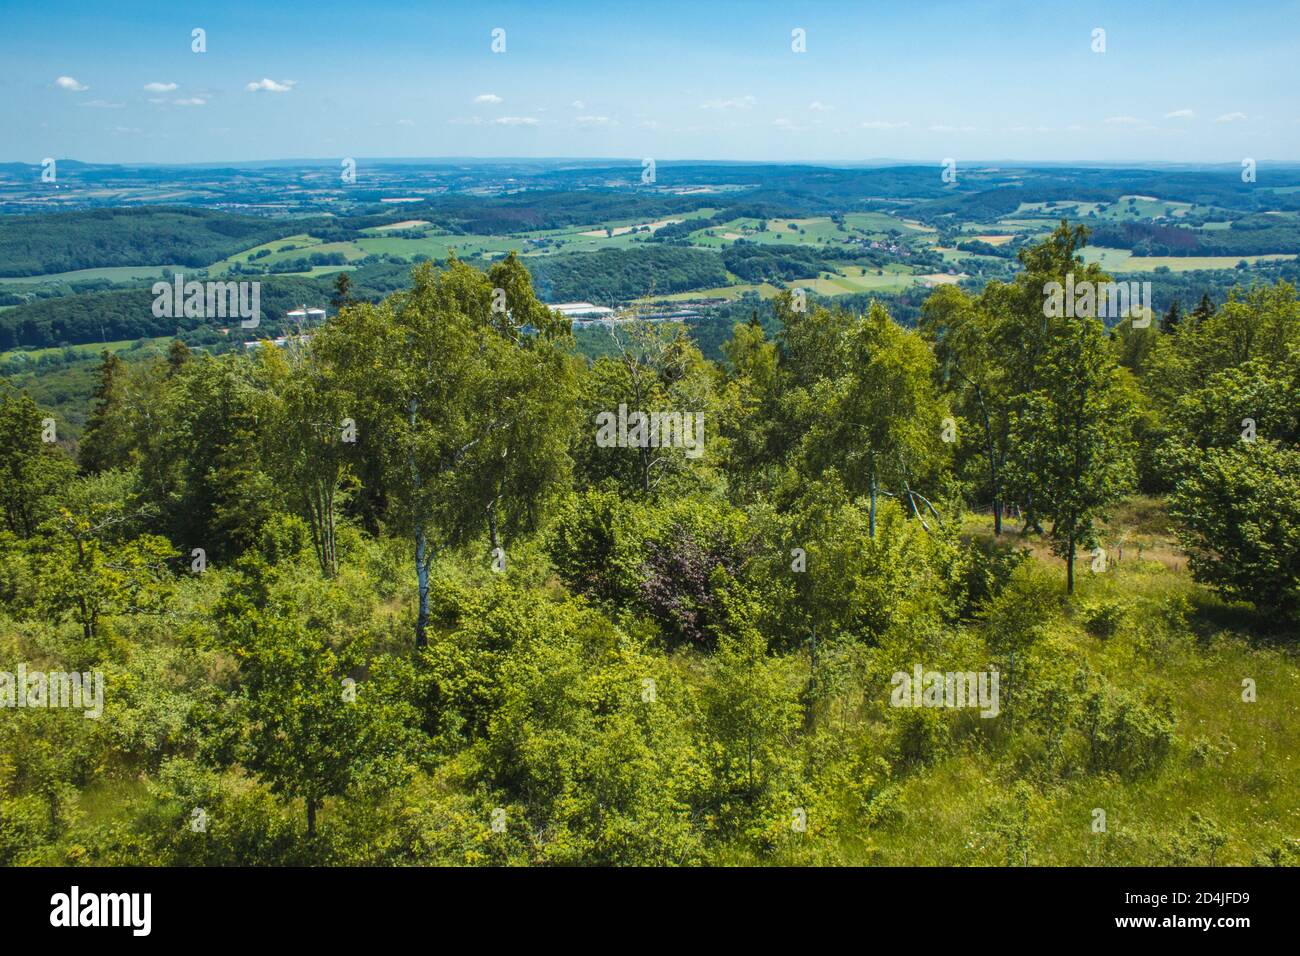 Teutoburg Forest. View of landscape at Teutoburg Forest / Egge Hills Nature Park. View from Velmerstot hill in North Rhine Westphalia, Germany Stock Photo